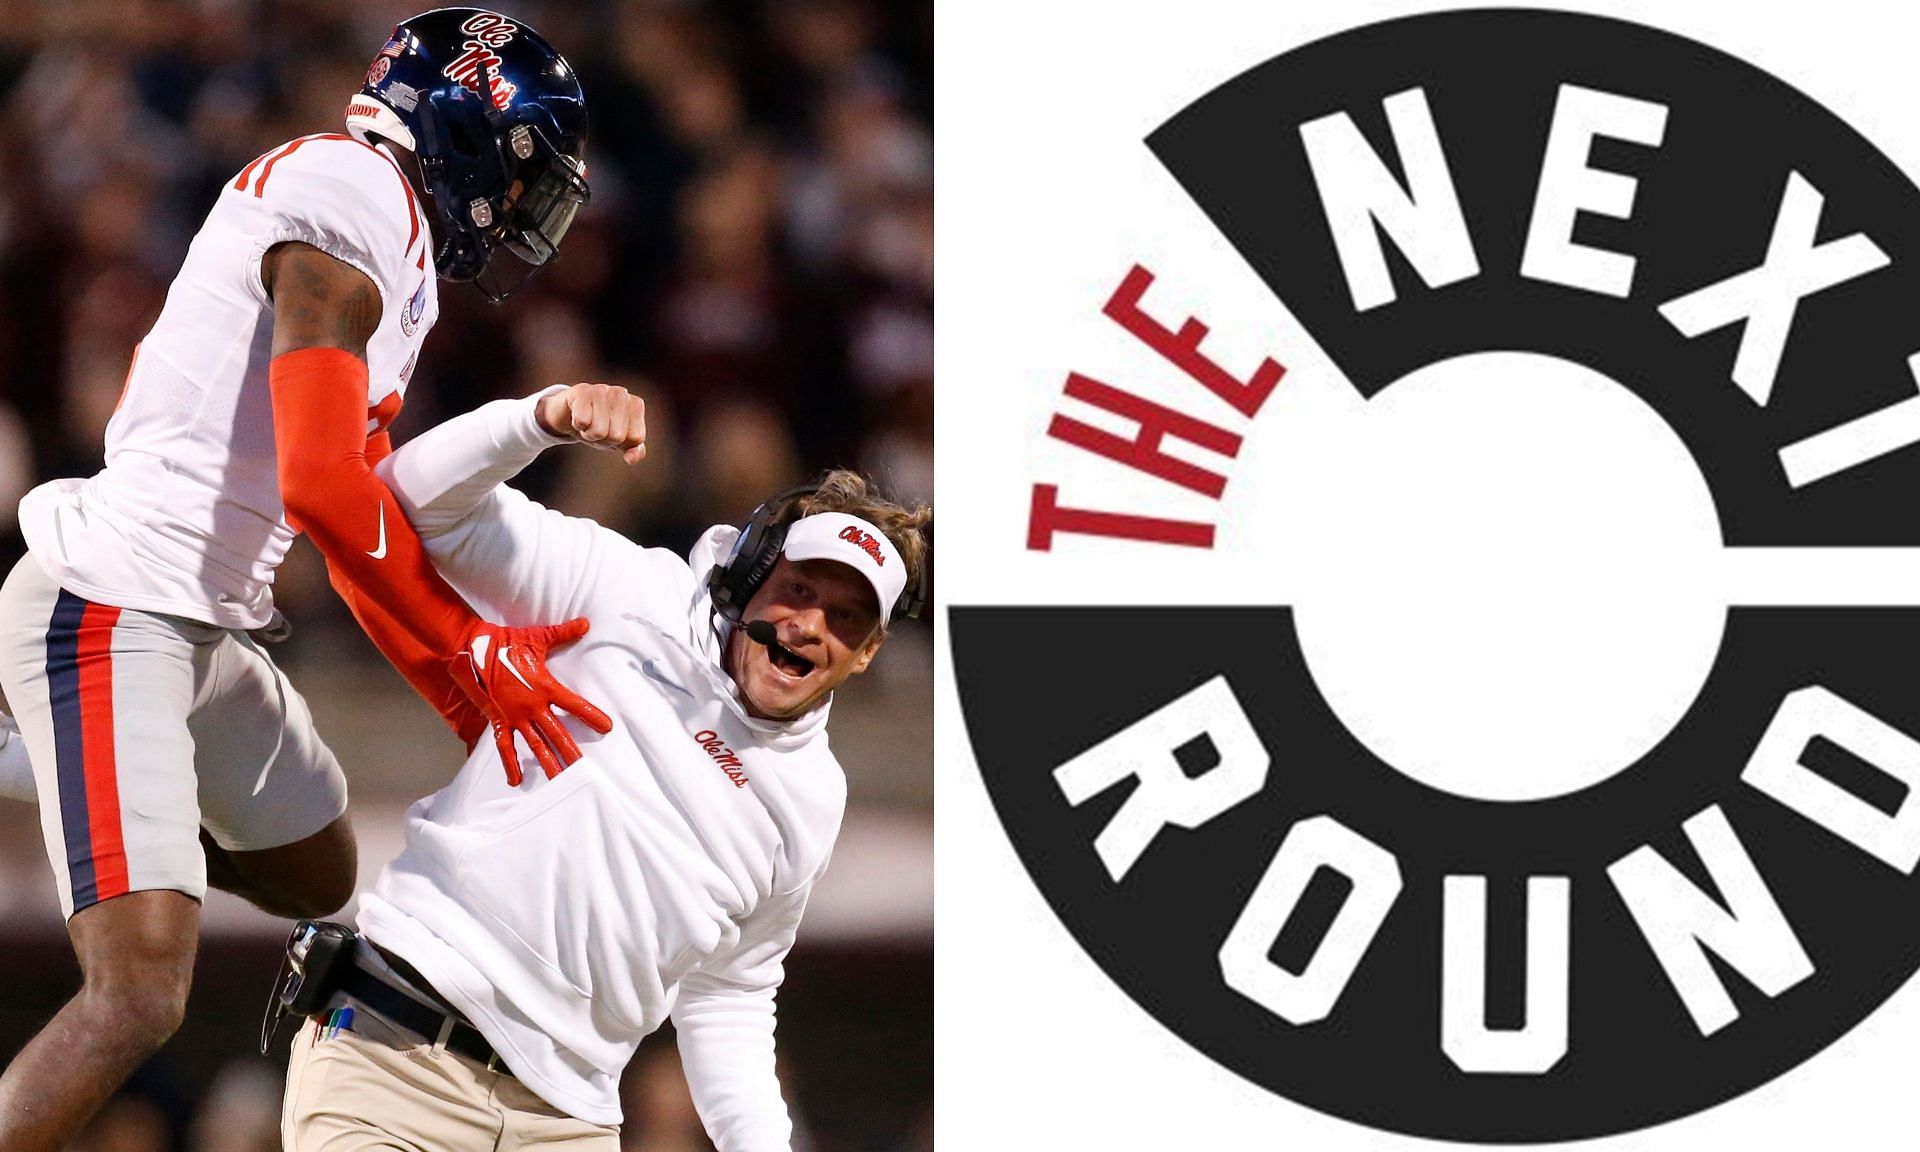 The Next Round Podcasters Challenge Lane Kiffin to Cement His Legacy with 12-Team Playoff Berth.